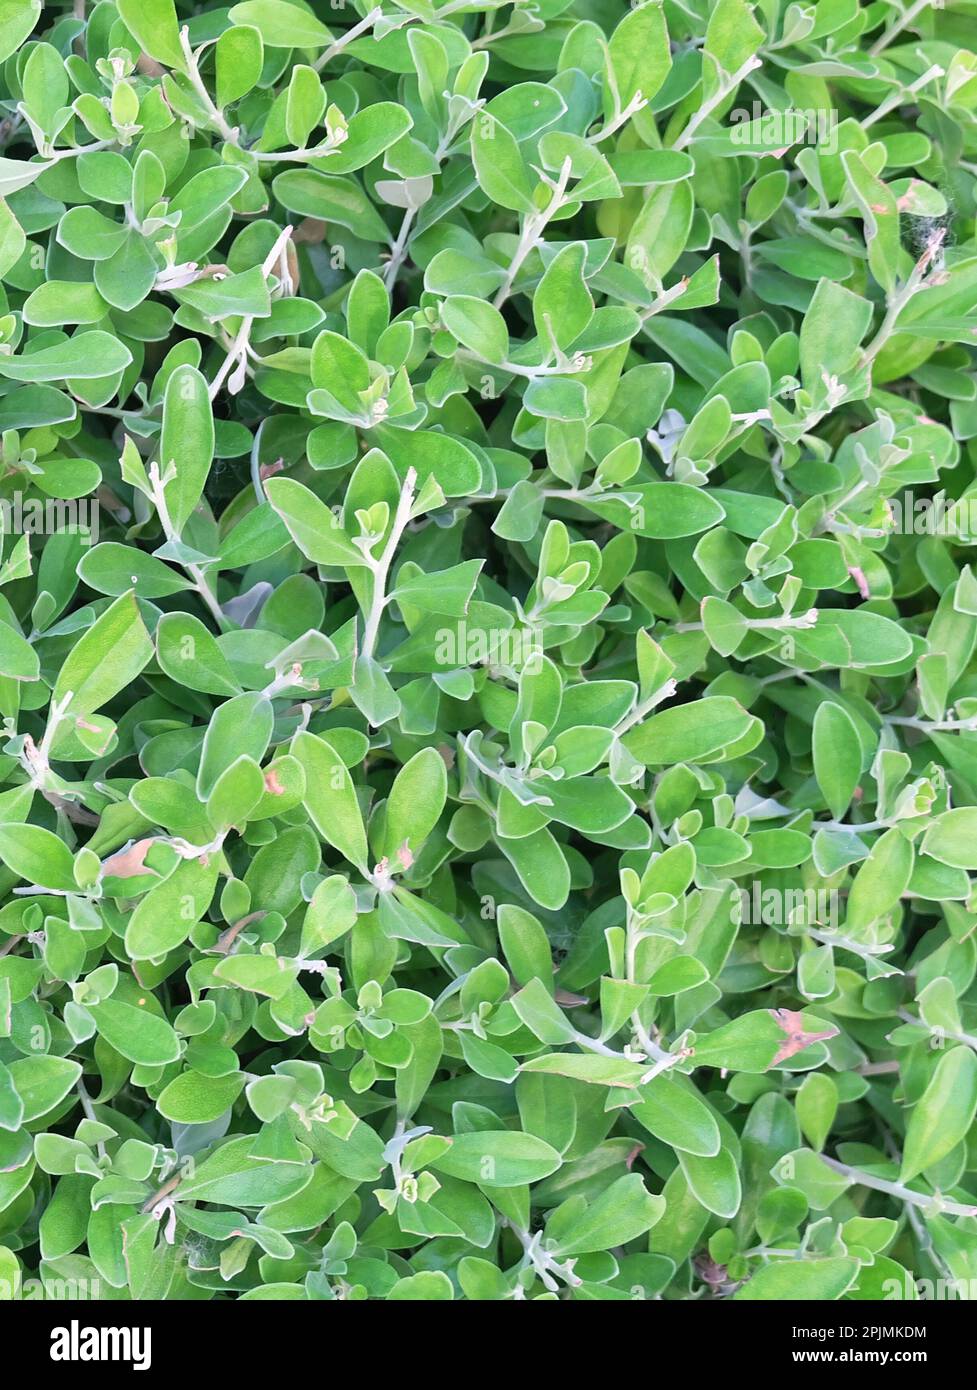 Ecology Concepts, Leucophyllum Frutescens, Purple Sage, Texas Ranger, Silverleaf or White Sage Plants with Green Leaves. Stock Photo